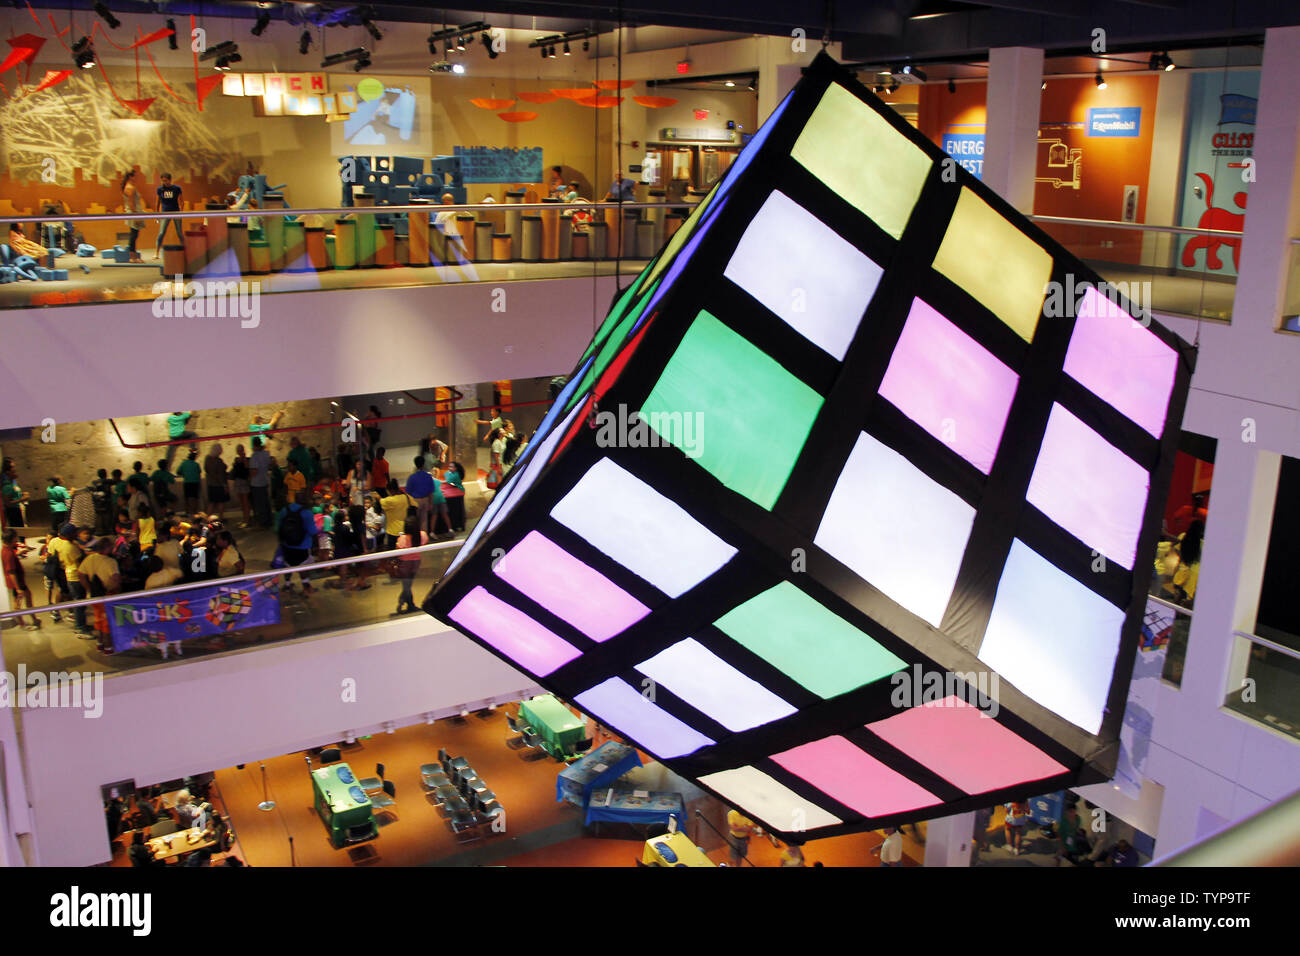 People walk through a Rubik's Cube Exhibit at the National Rubik's Cube Championship at Liberty Science Center in Jersey City, NJ on August 1, 2014. The Championship and the Guinness Book of World Records challenge are being held in conjunction with the Center's Beyond Rubik's Cube exhibition, marking the 40th anniversary of the Rubik's Cube and its impact on the world.        UPI/John Angelillo Stock Photo